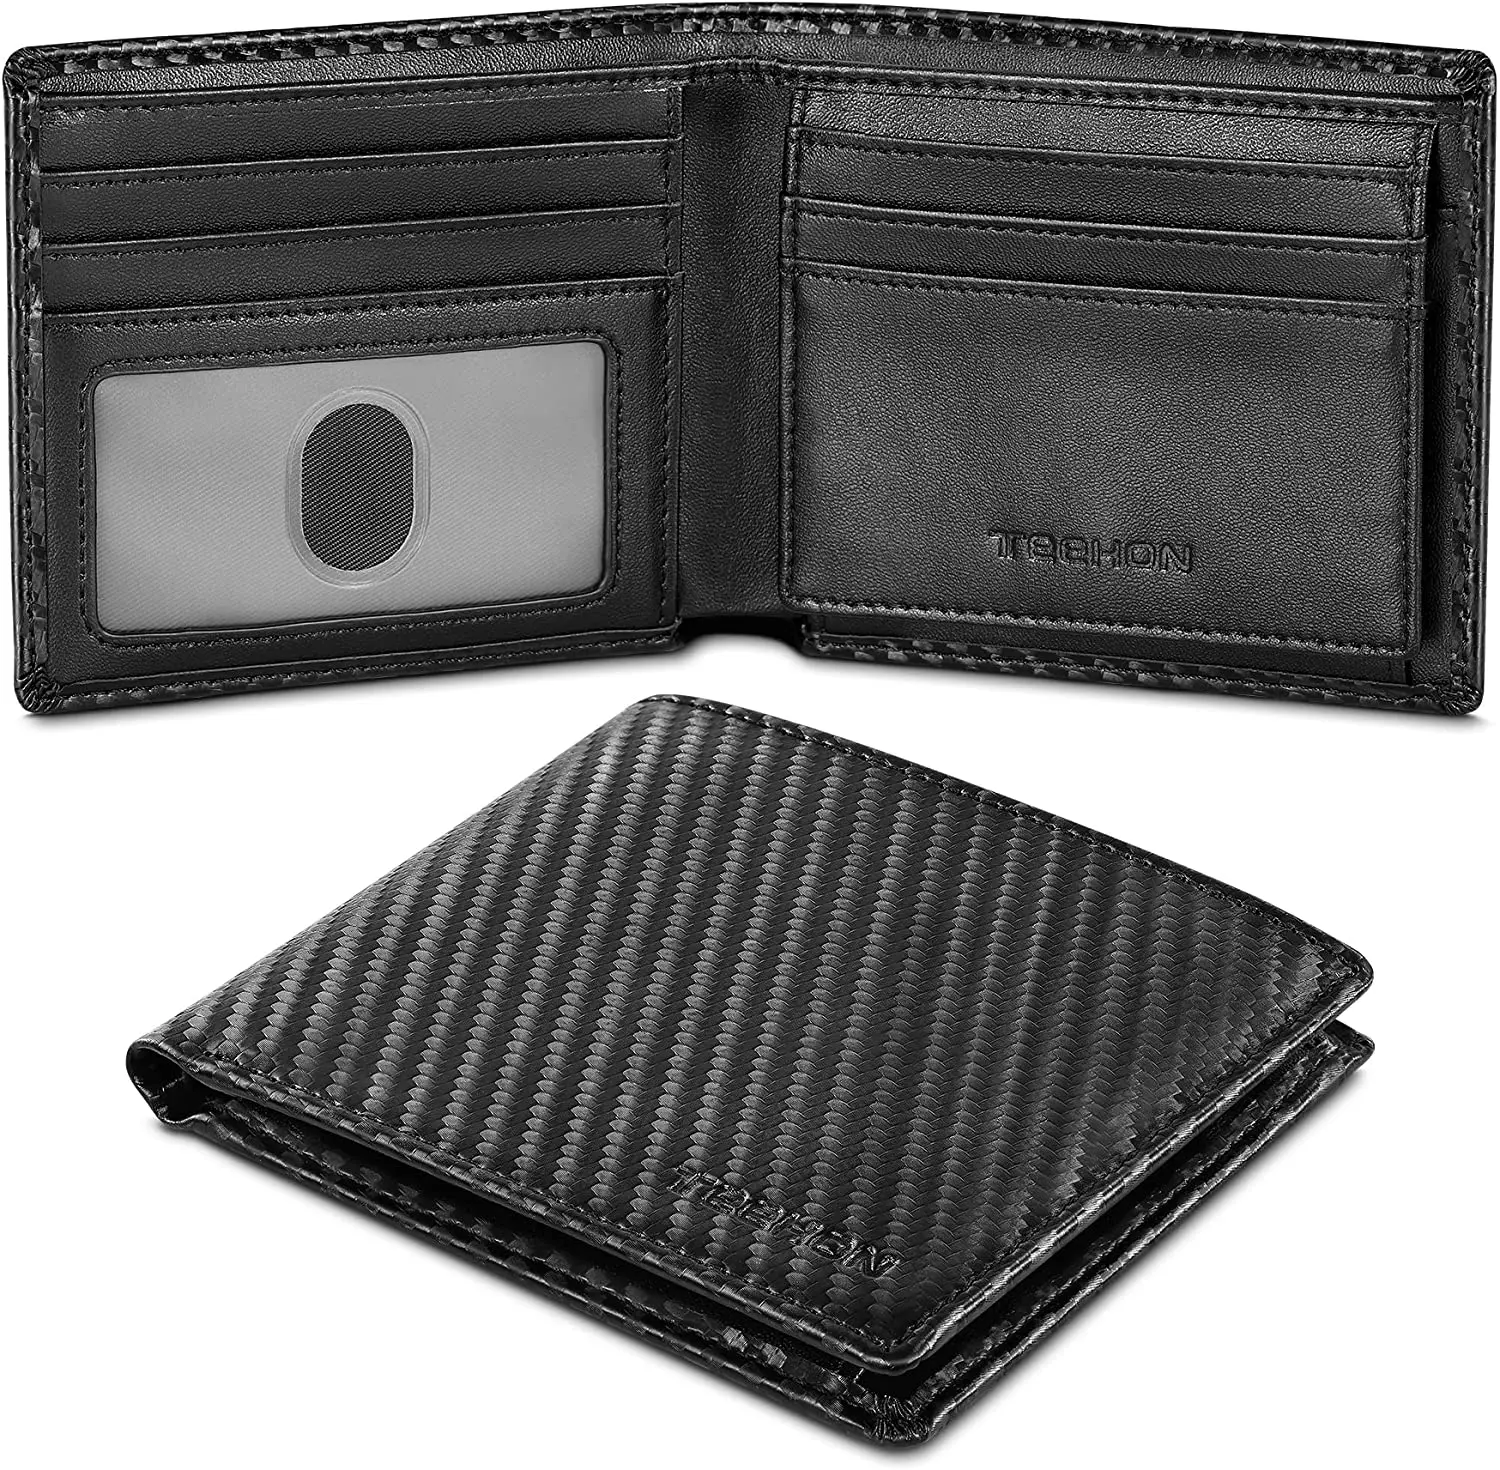 TEEHON Wallets Mens RFID Blocking Carbon Fibre Leather with 11